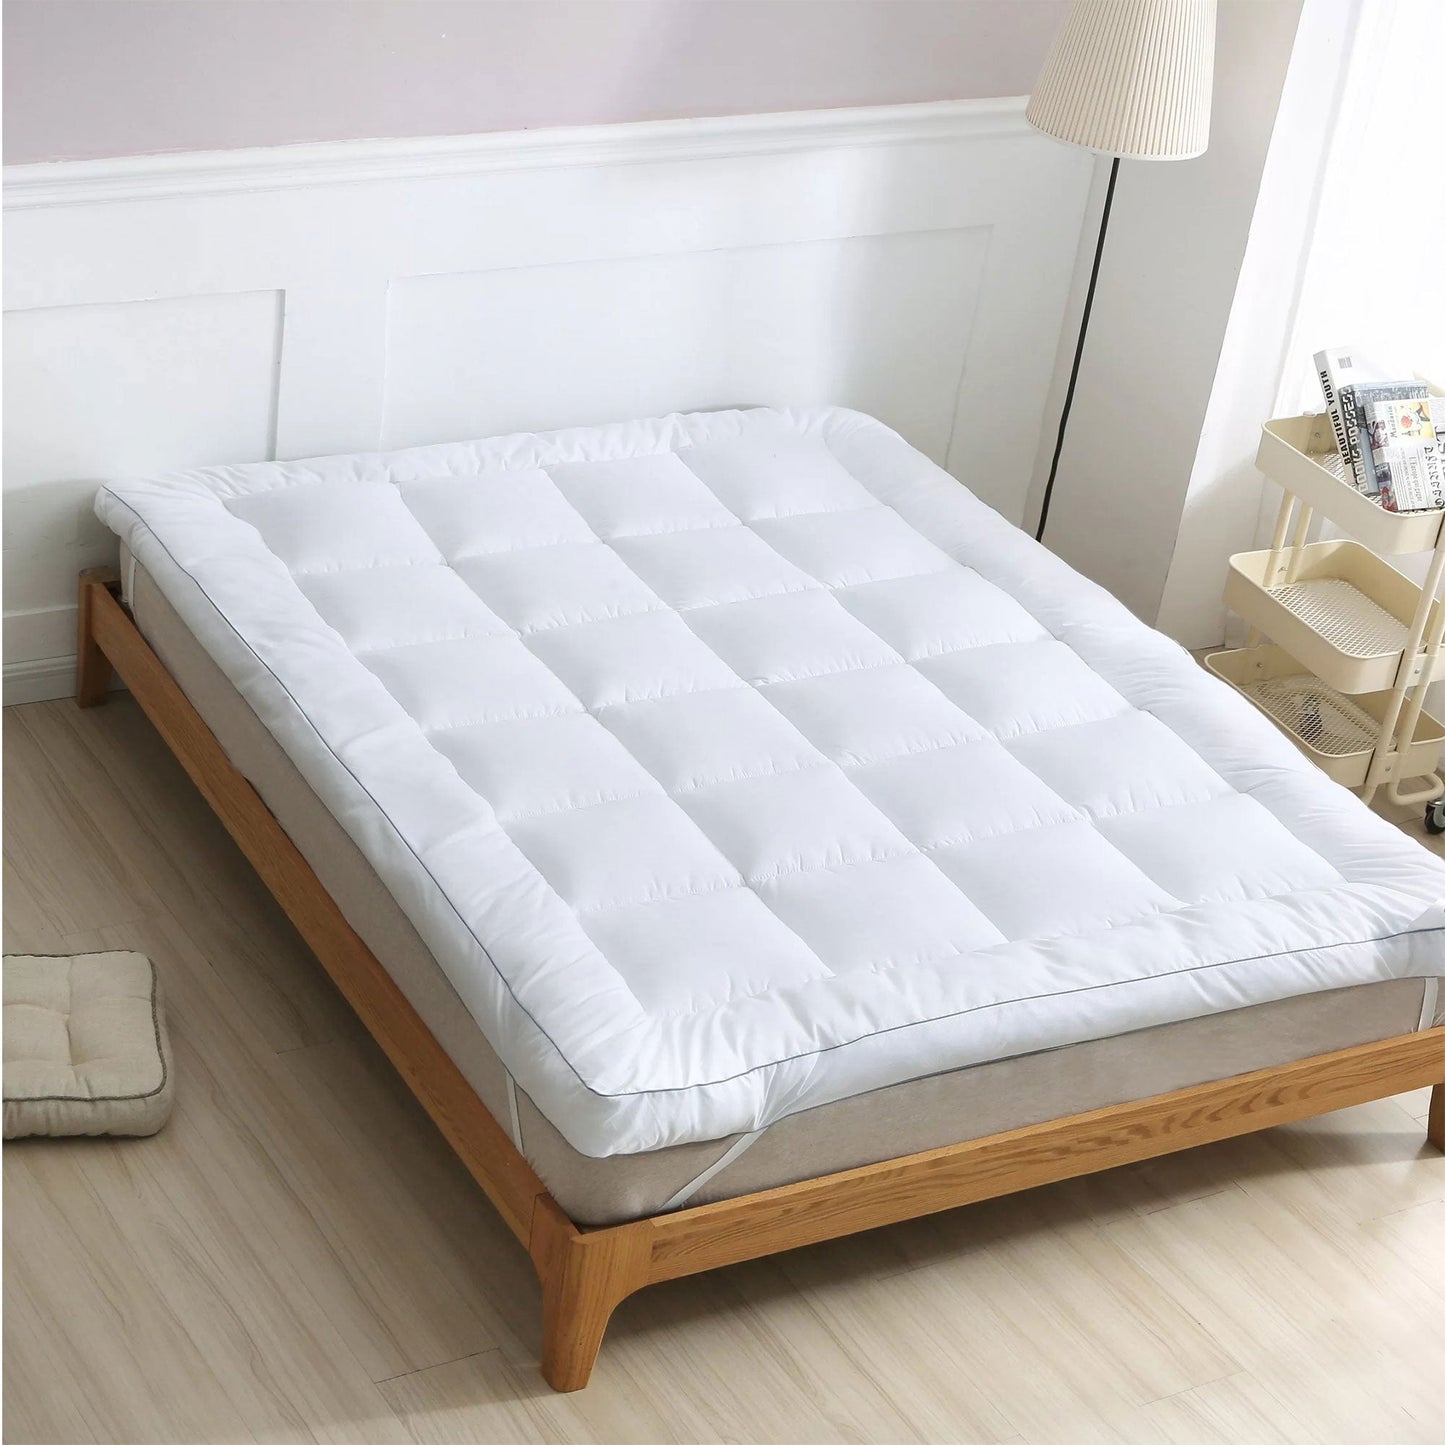 Extra Thick Mattress Topper 10cm Hotel Quality Protector - TheComfortshop.co.ukMattress Toppers0721718963424thecomfortshopTheComfortshop.co.ukMicrogel Topper 10CM DoubleDoubleExtra Thick Mattress Topper 10cm Hotel Quality Protector - TheComfortshop.co.uk